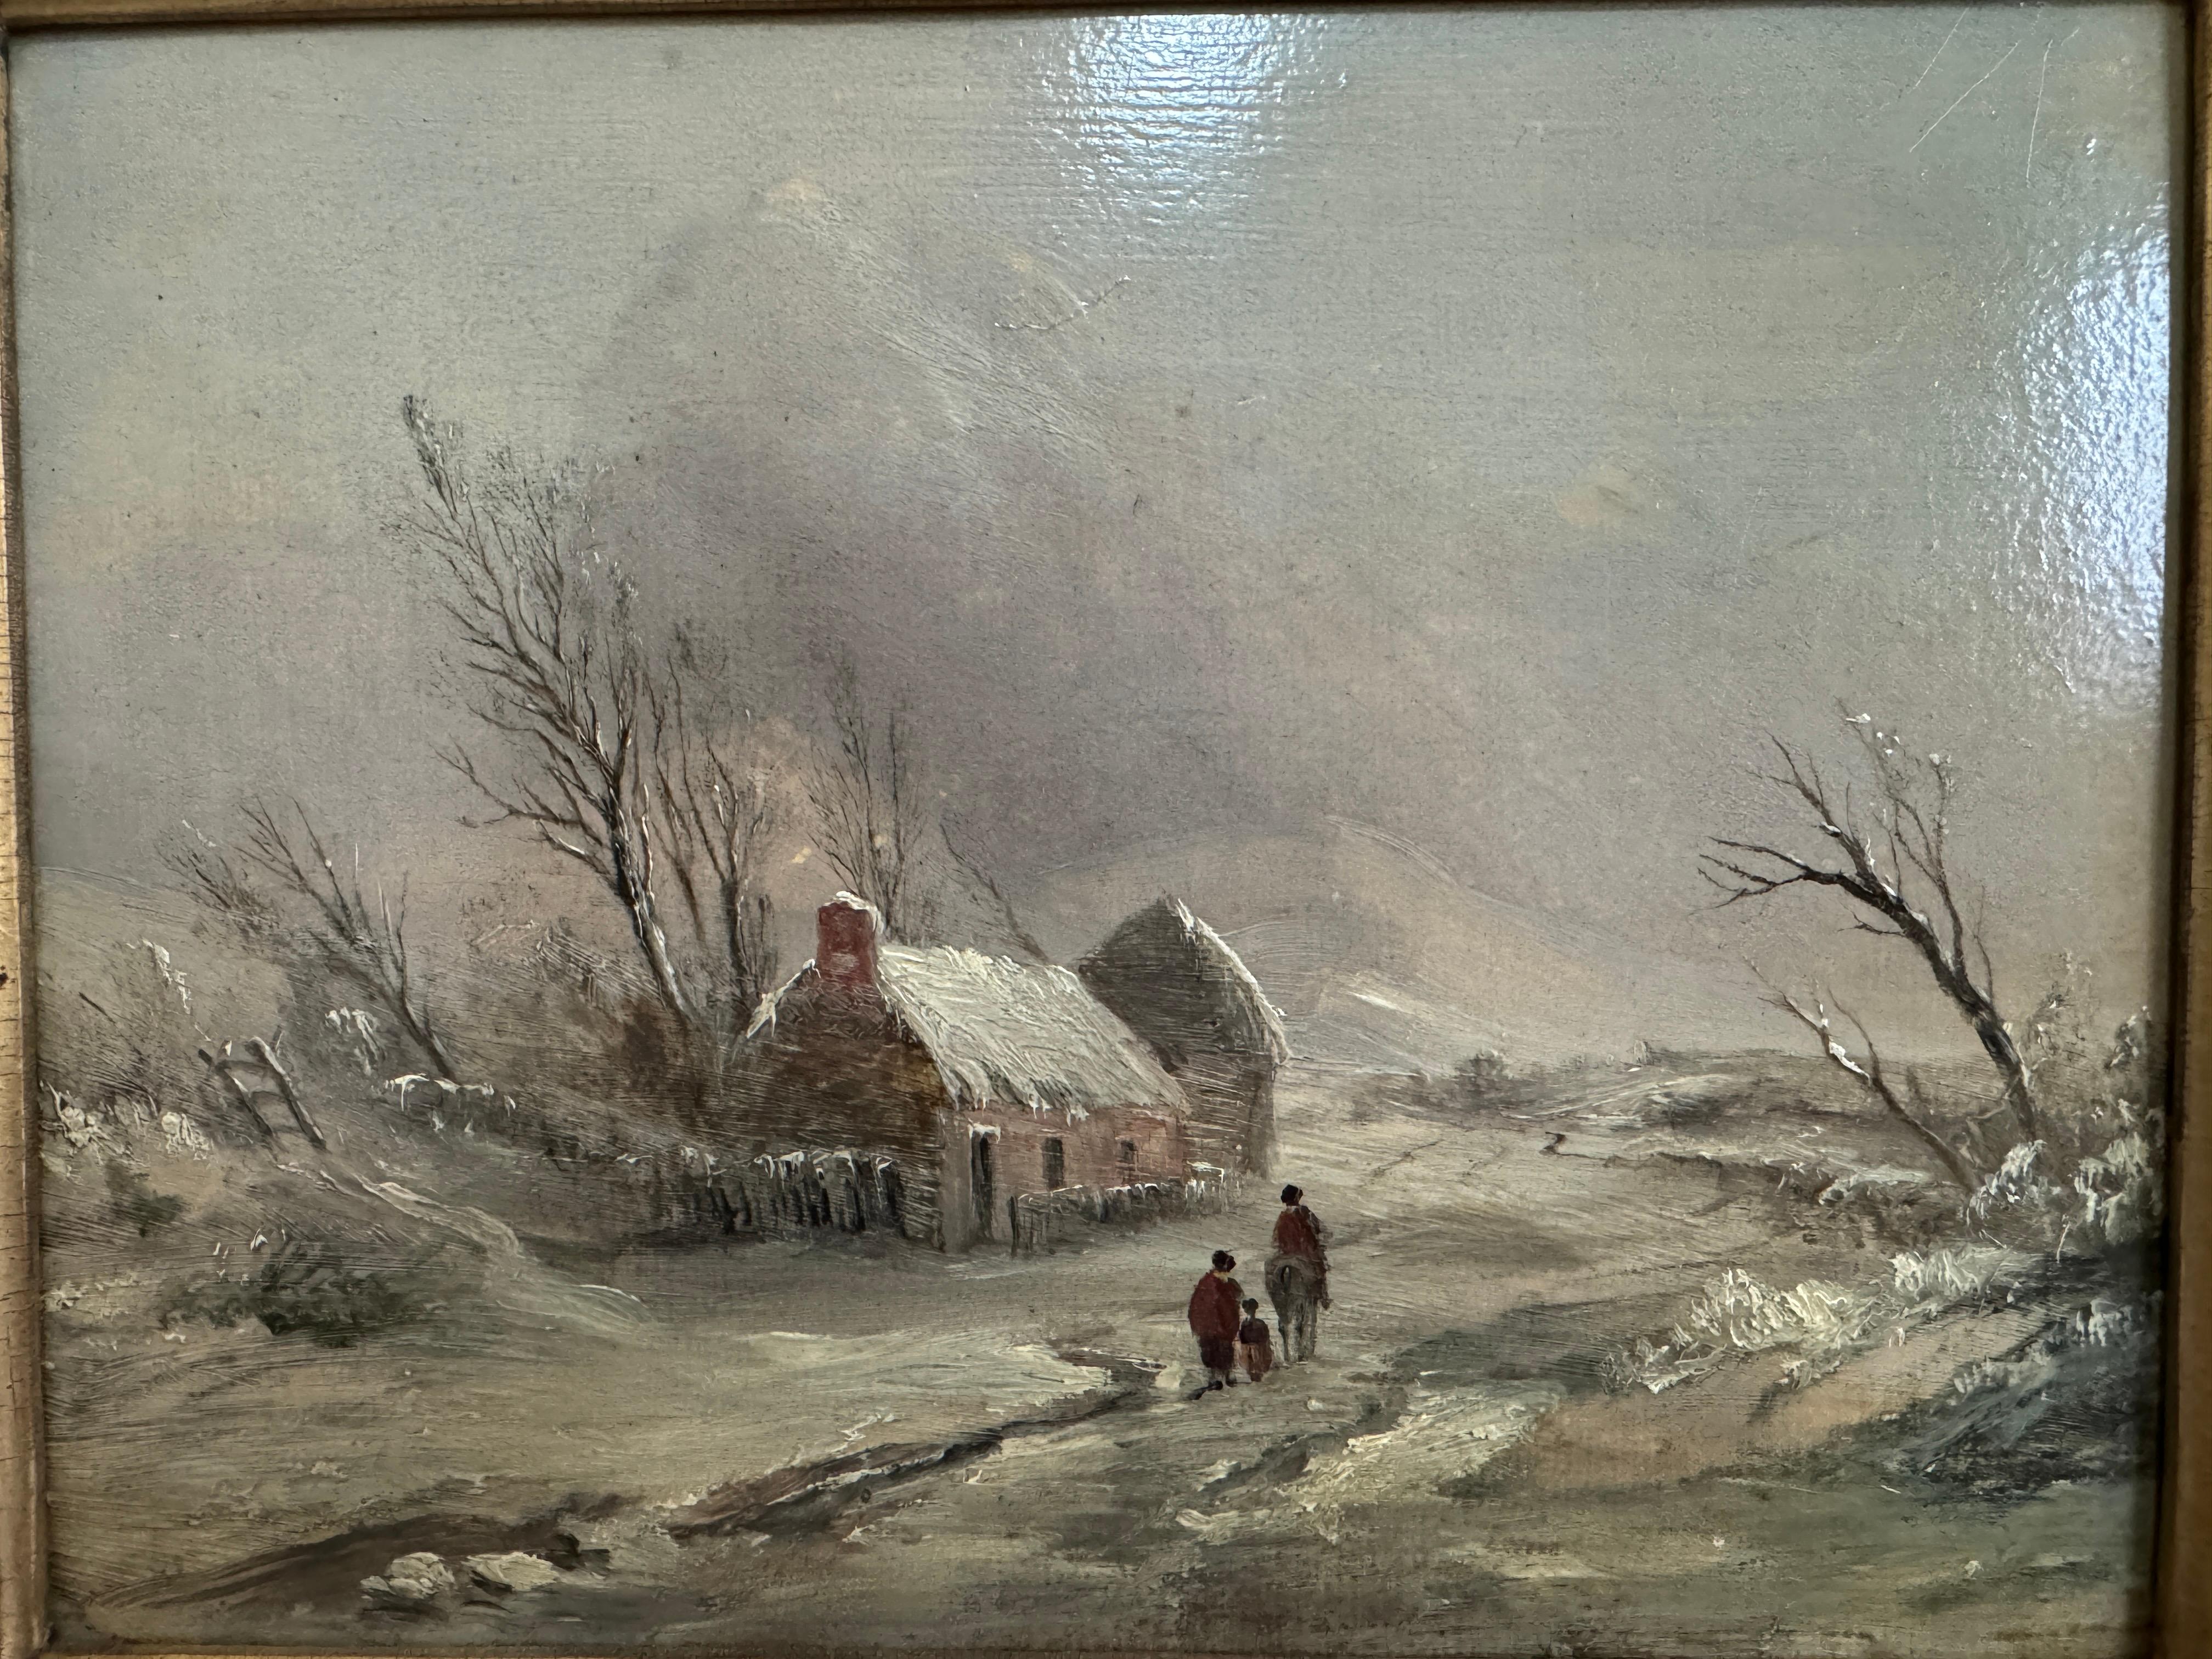 David Cox  'Snow Scene'  c1840 , inscribed verso.  

Very much in the manner of David Cox (1783 - 1859), has a framers and board label 'G Rowney & Co. Rathbourne Place, London'. Rowney left this address in the 1840's which is a few years after David